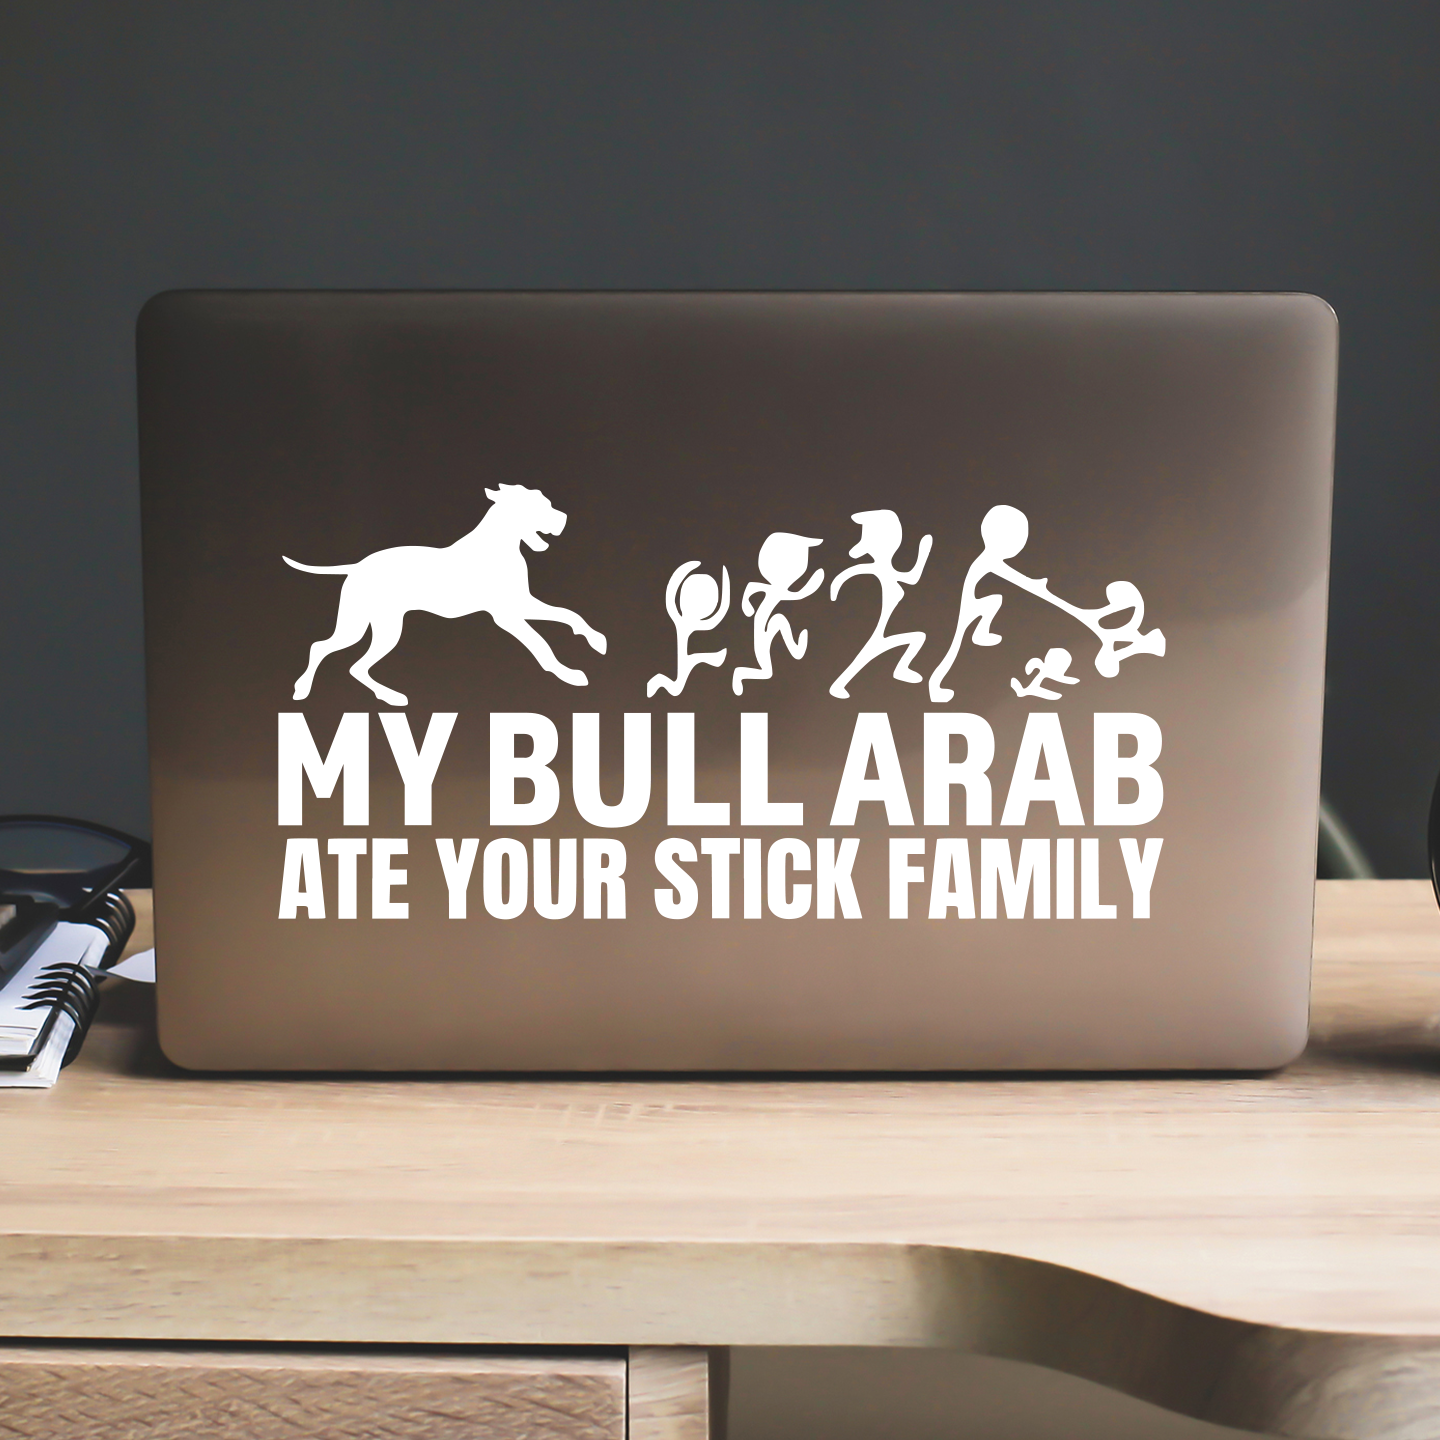 My Bull Arab Ate Your Stick Family Sticker